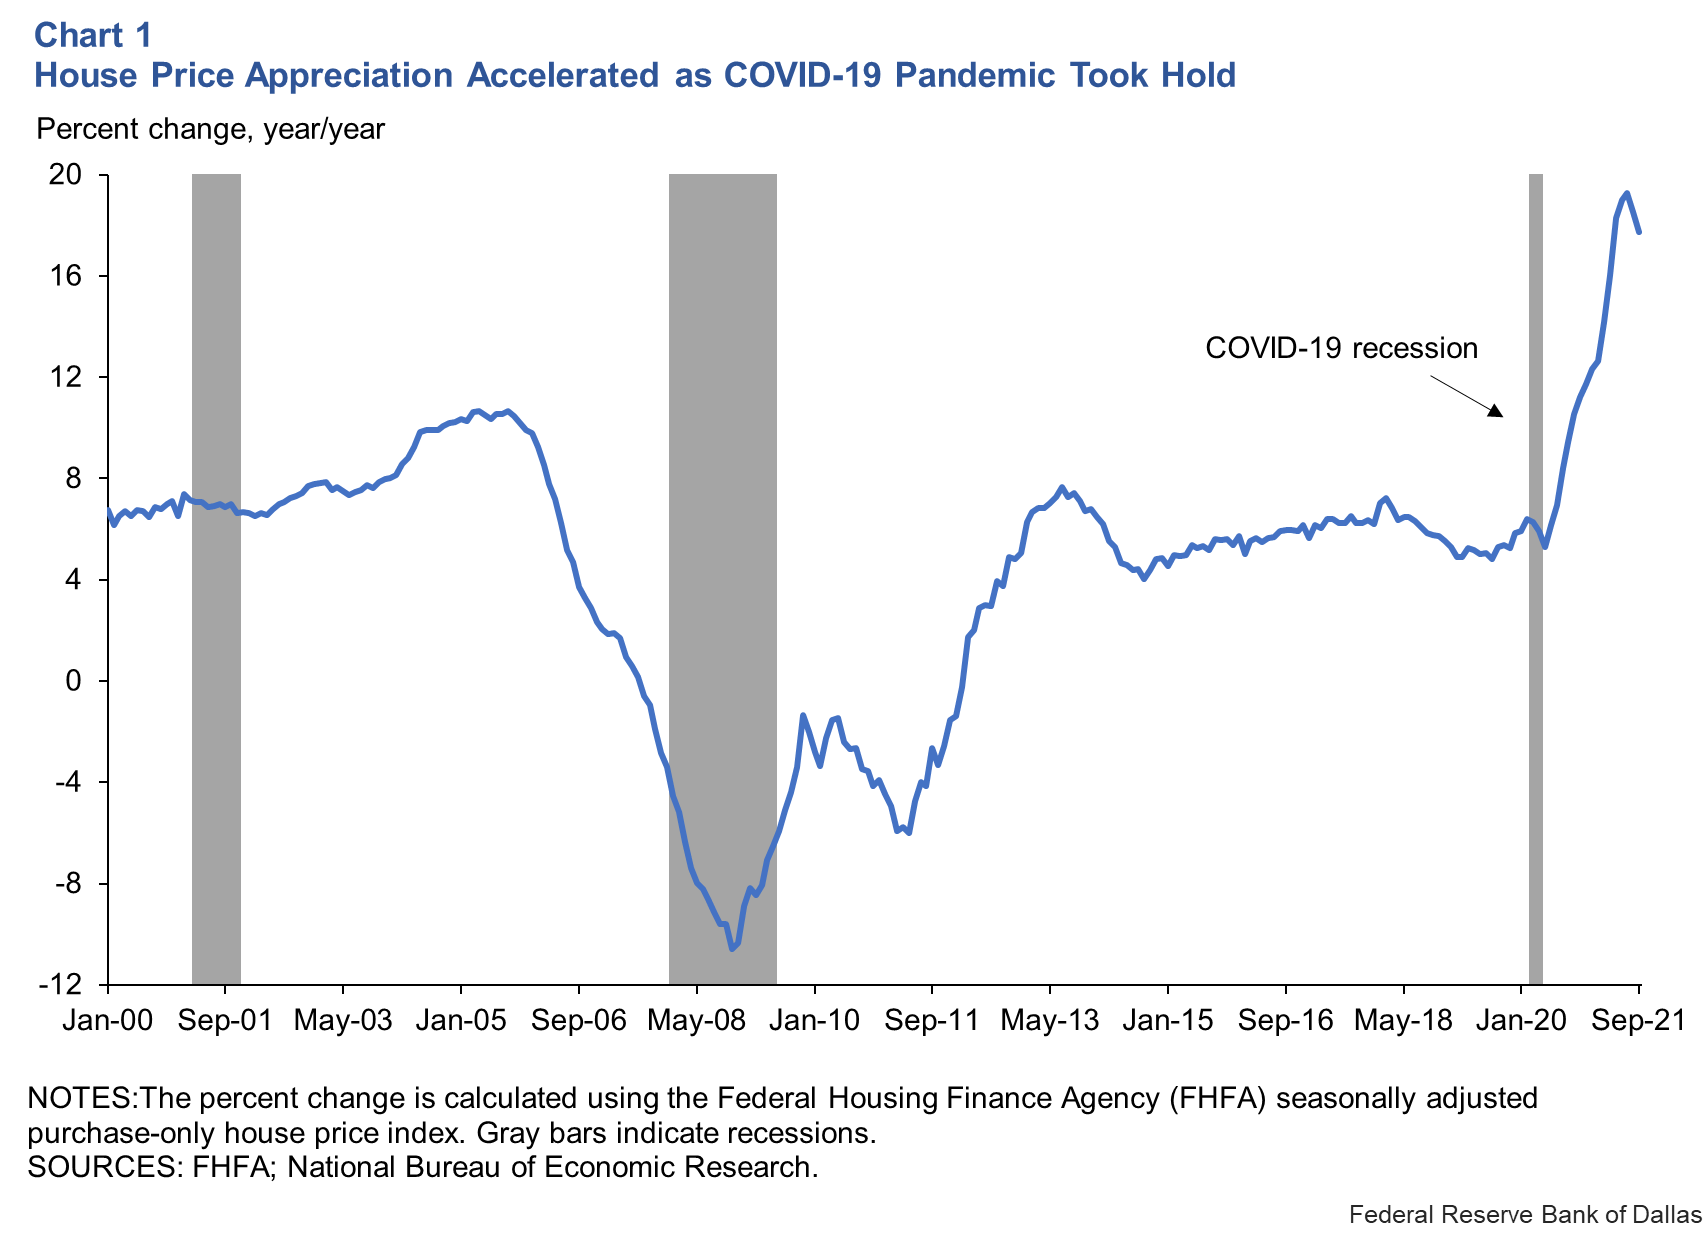 Chart 1: House Price Appreciation Accelerated as COVID-19 Pandemic Took Hold